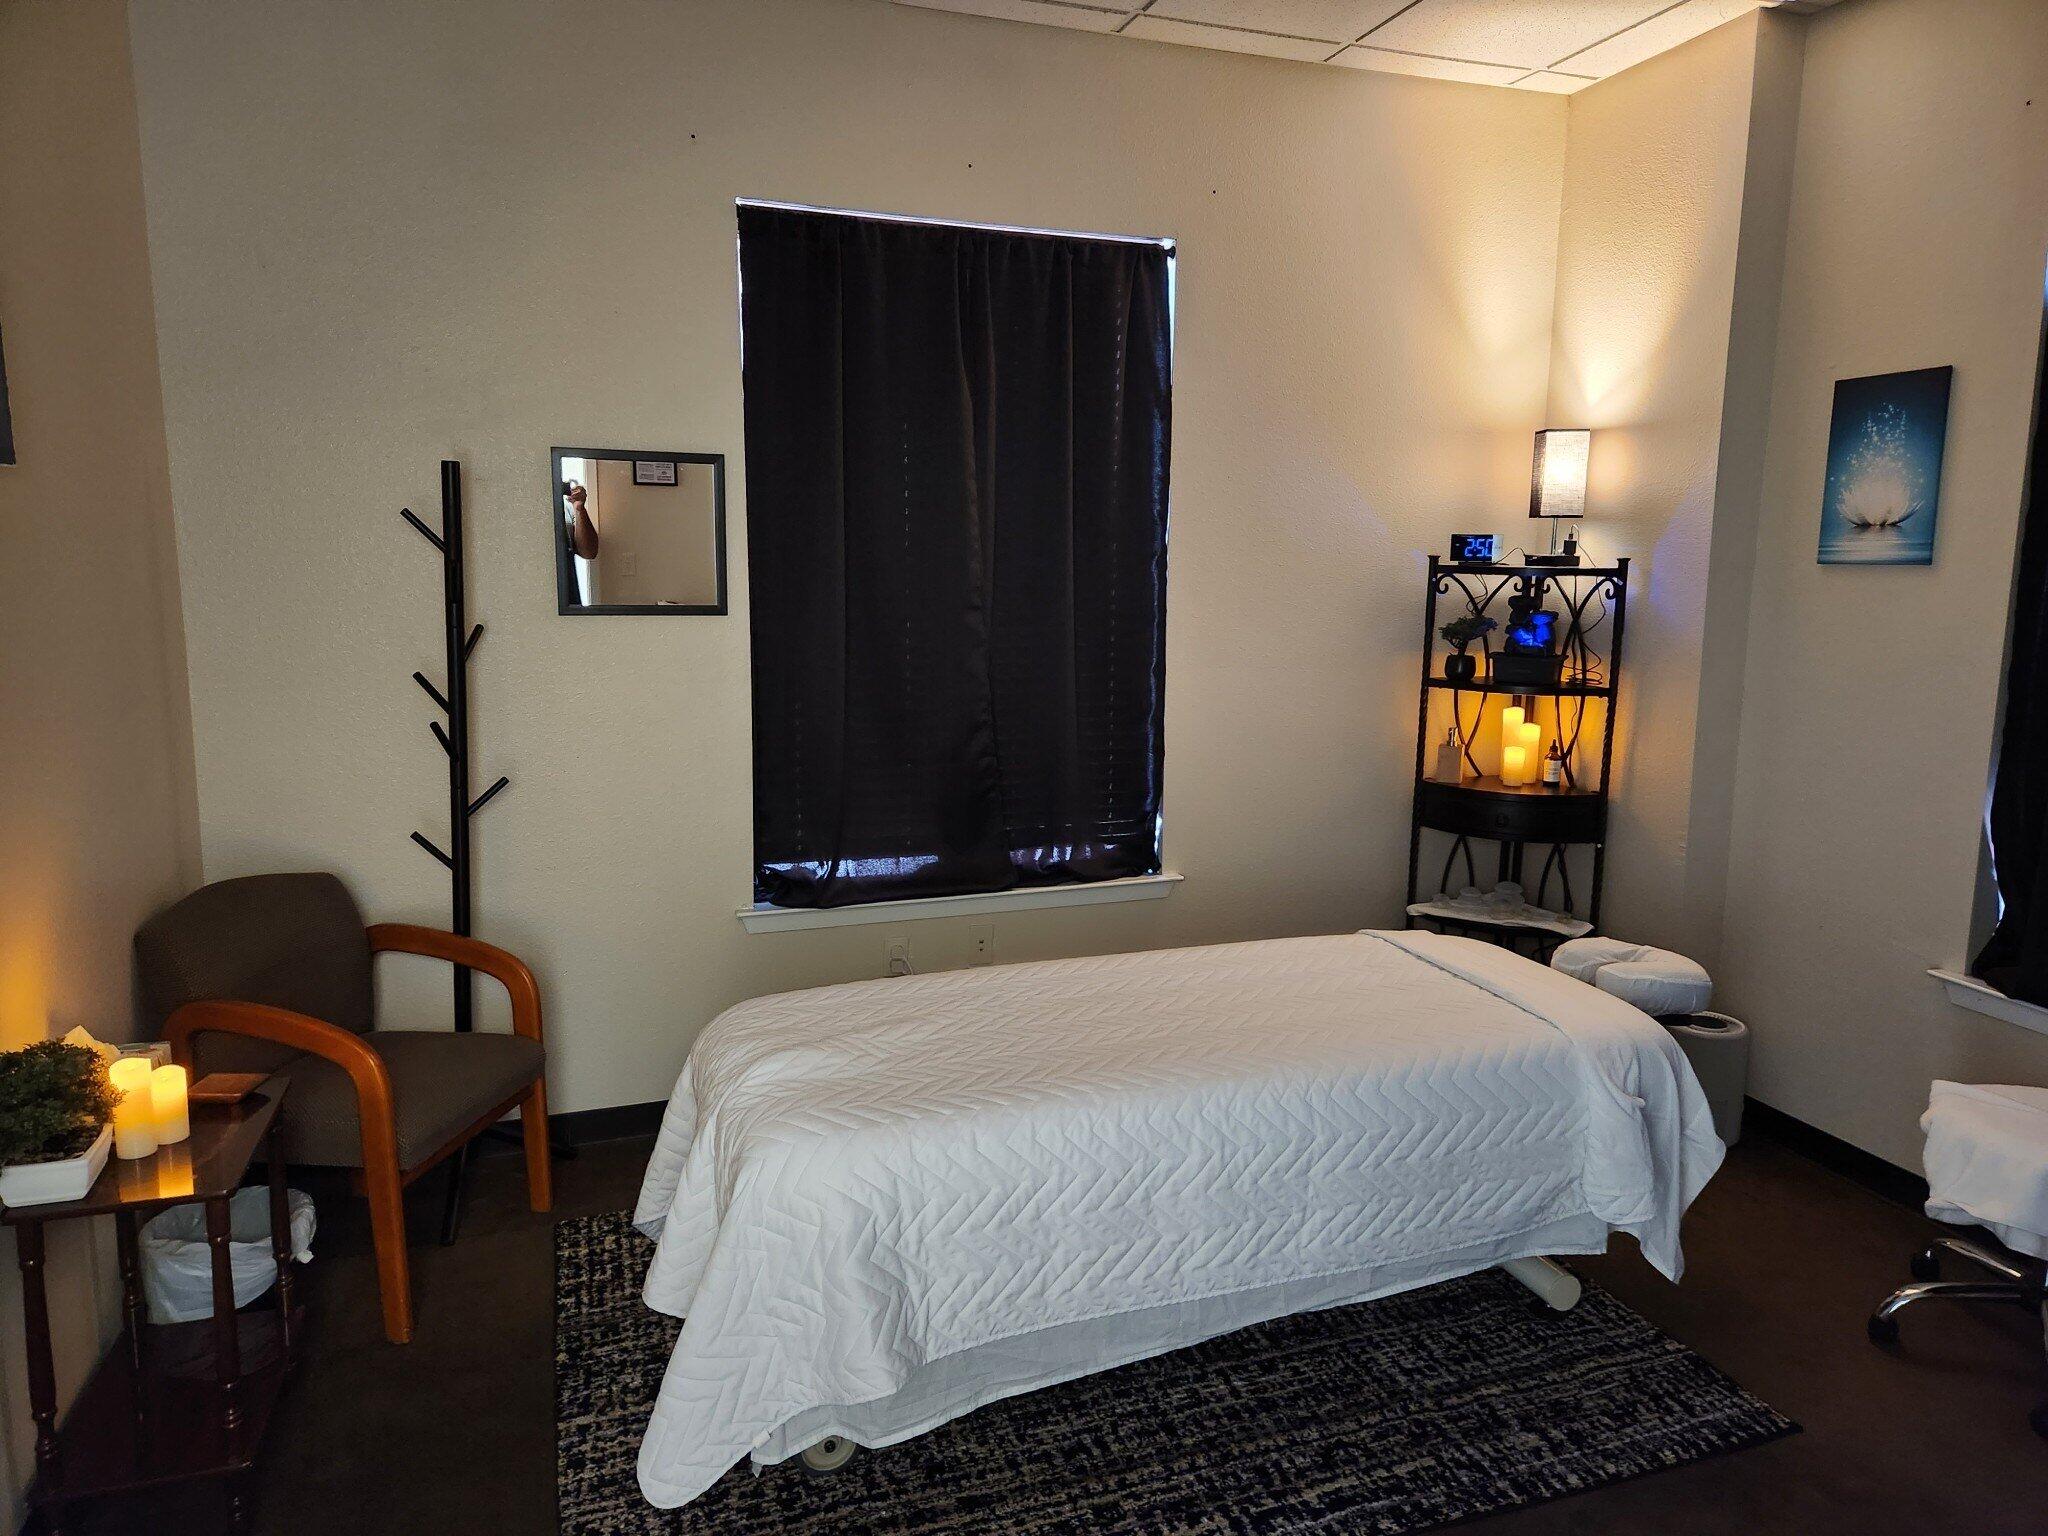 Massage By Cory West 29710 US-281, Bulverde Texas 78163